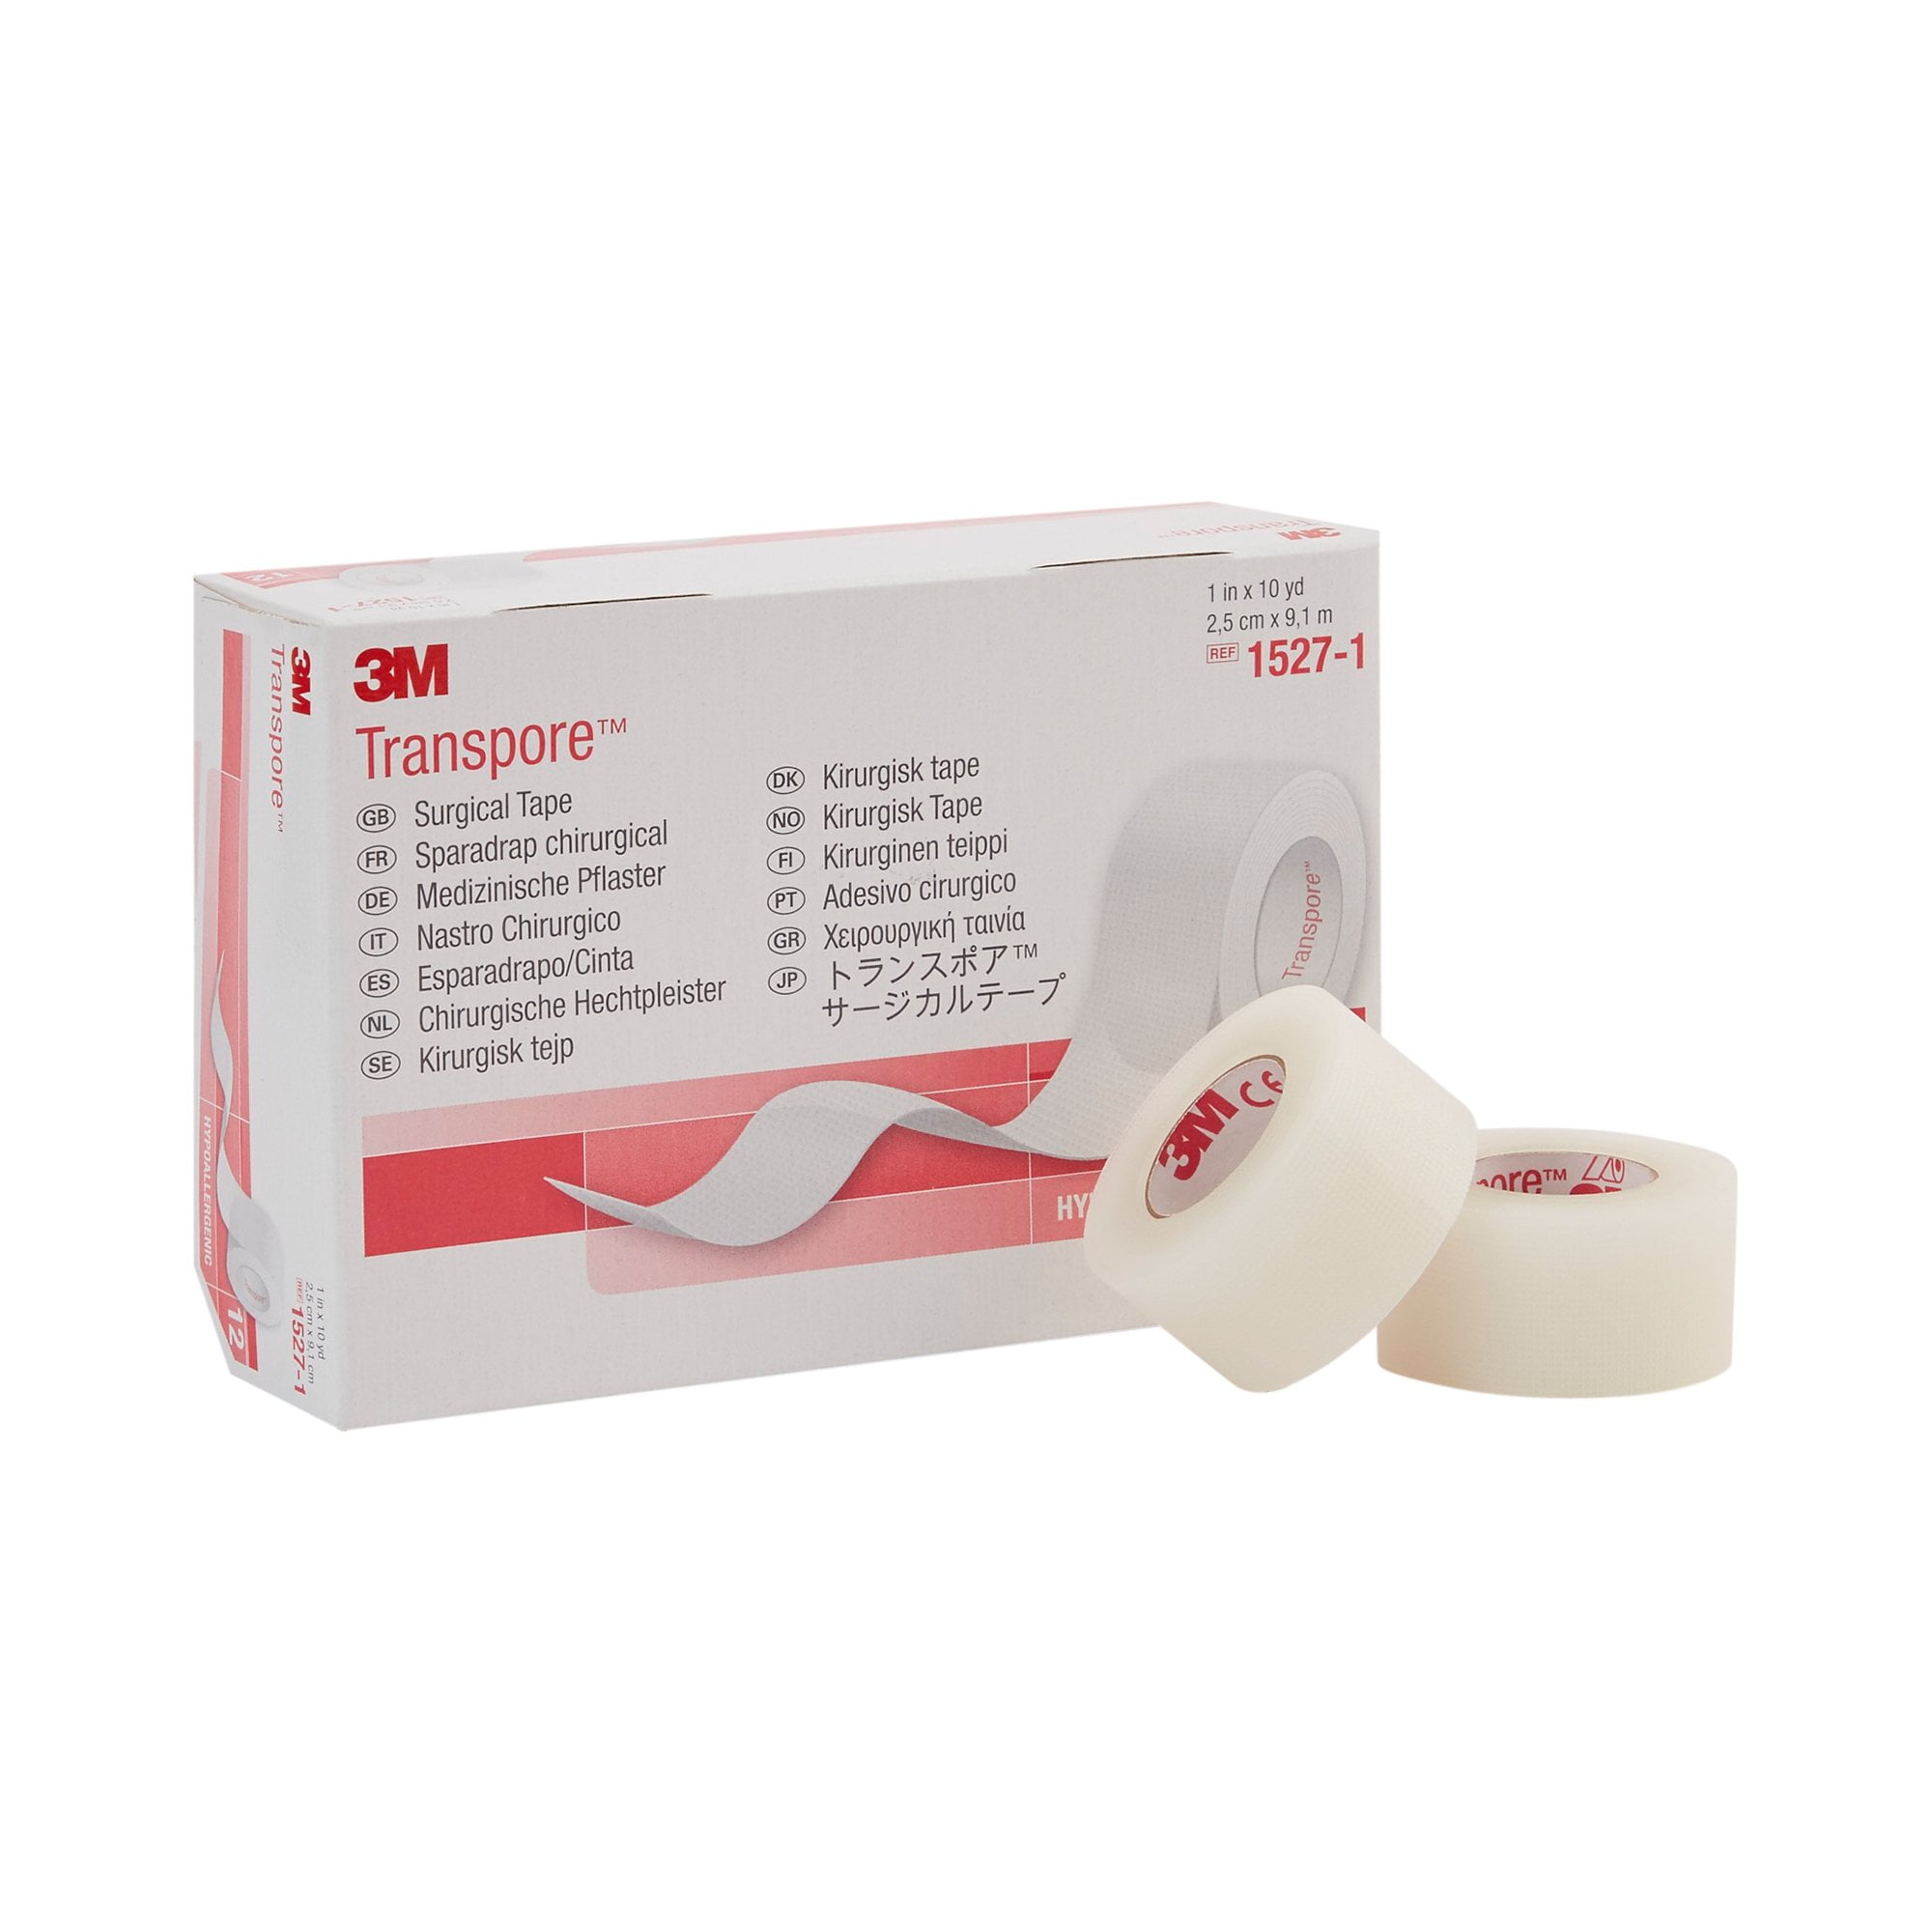 3M Micropore Paper Tape - White 1 x 10yds (Box of 12)